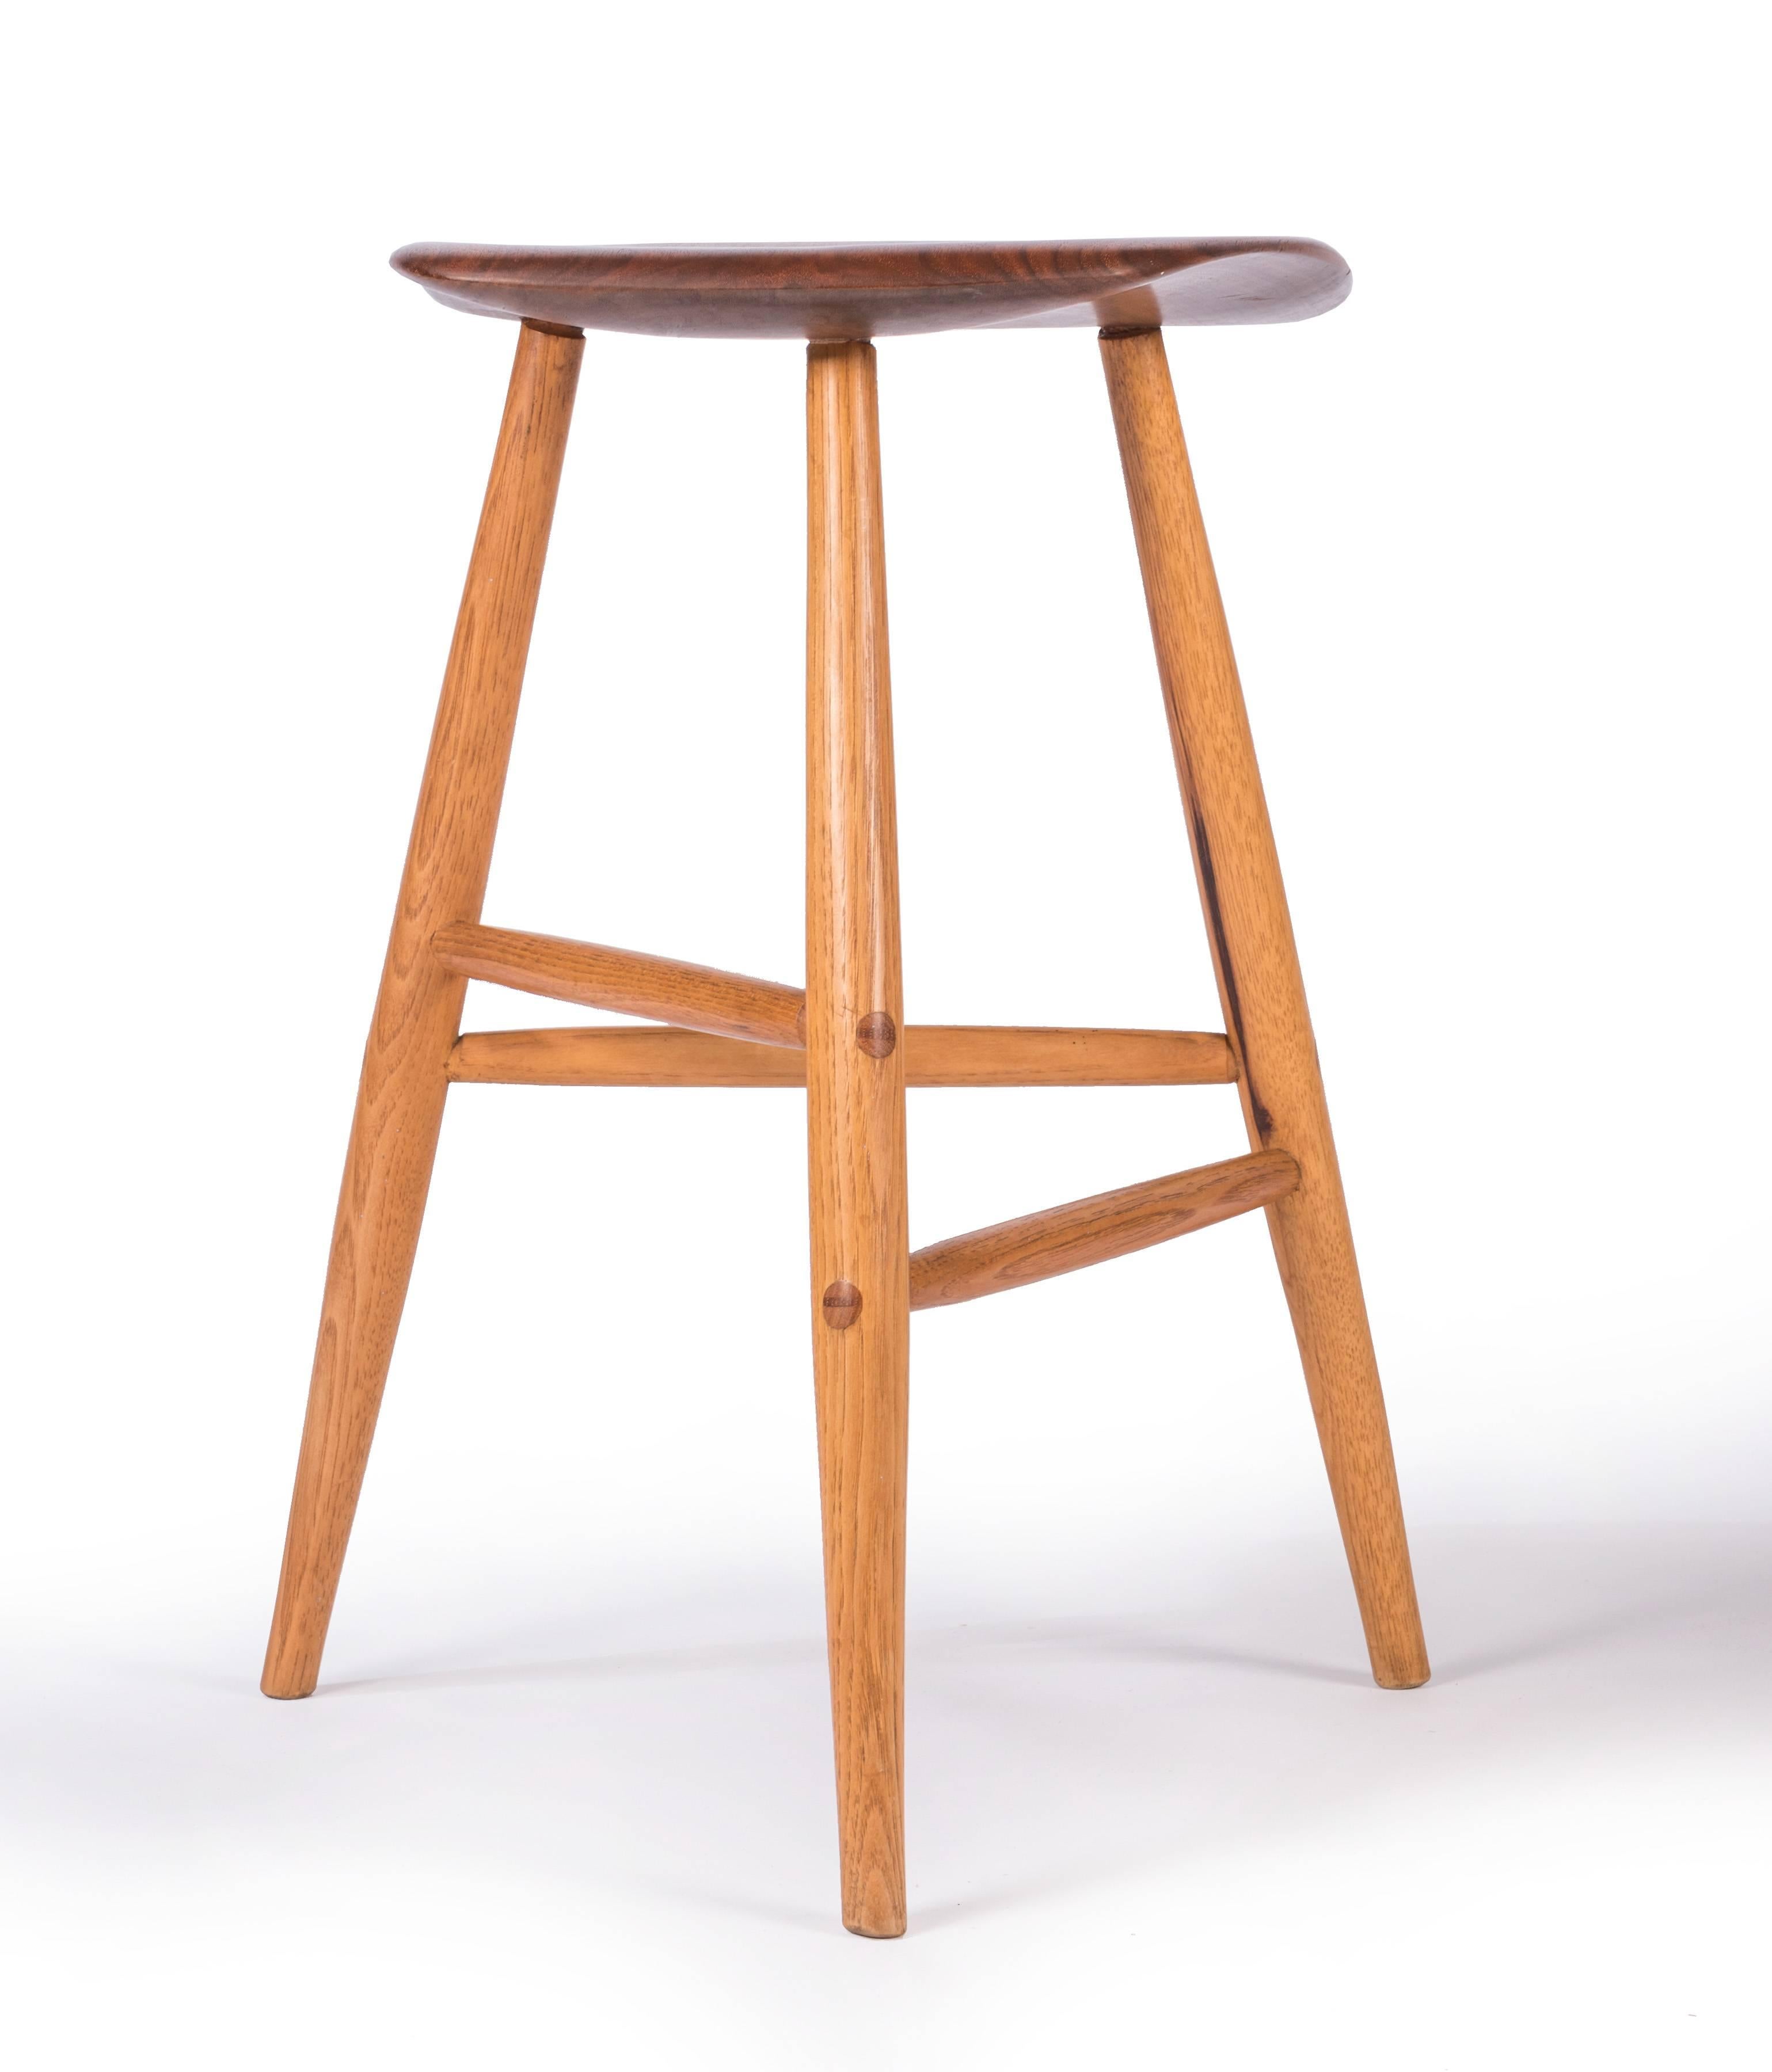 Hand-carved stool by Wharton Esherick, the Father of the American Studio Craft Movement. This iconic stool is an excellent example of Esherick's work and features a sculptural free-form walnut seat over three tapered legs of carved oak connected